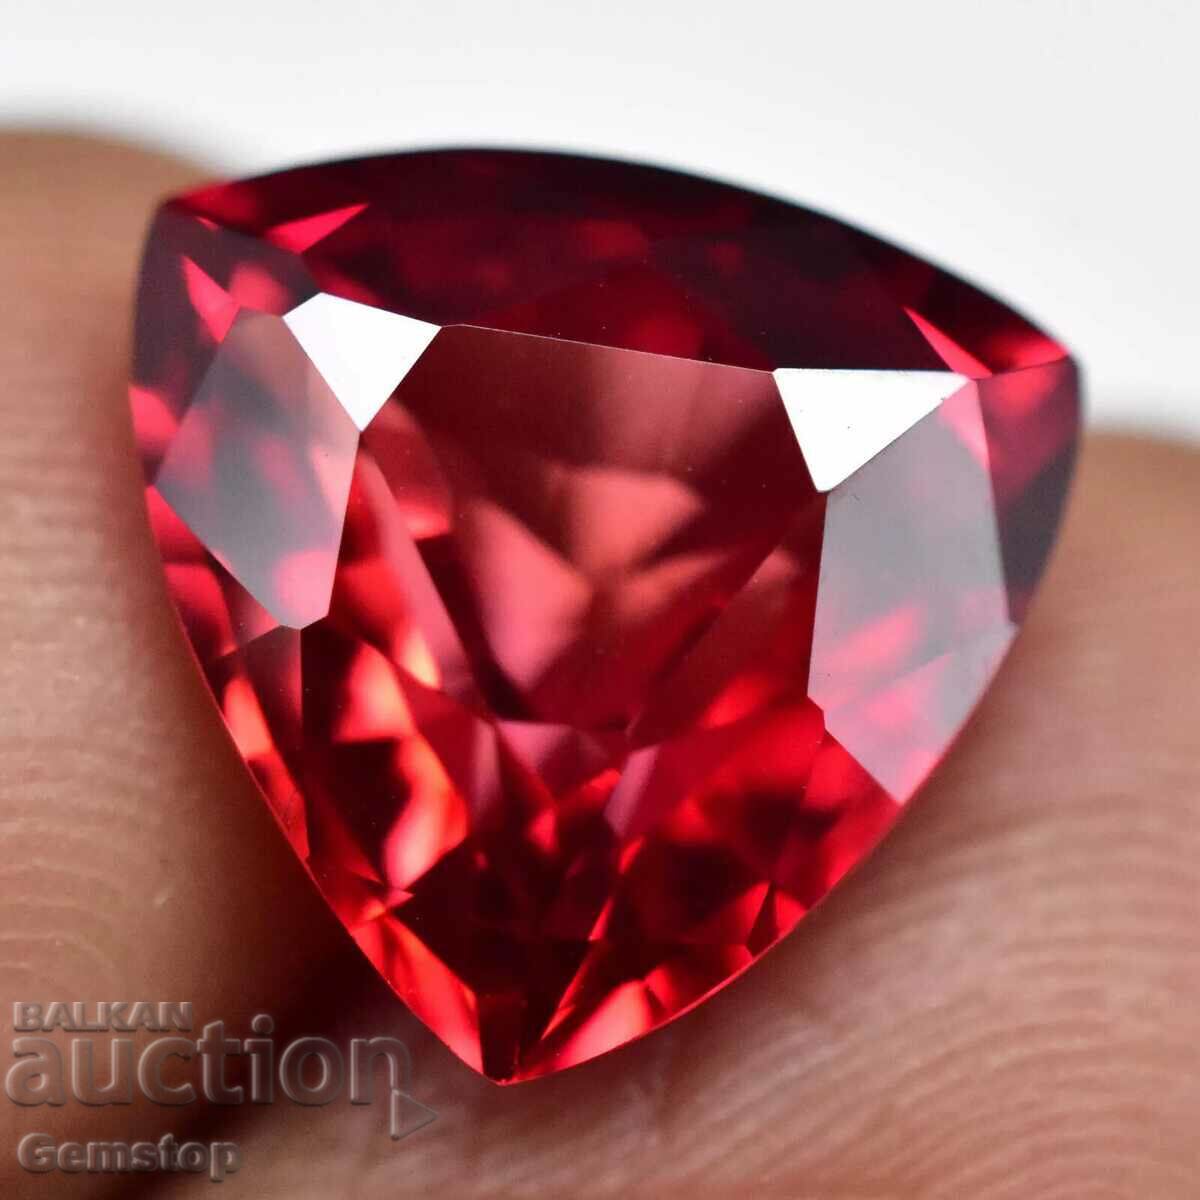 BZC! 8.50 ct natural ruby trillion cert. GGL of 1 st.